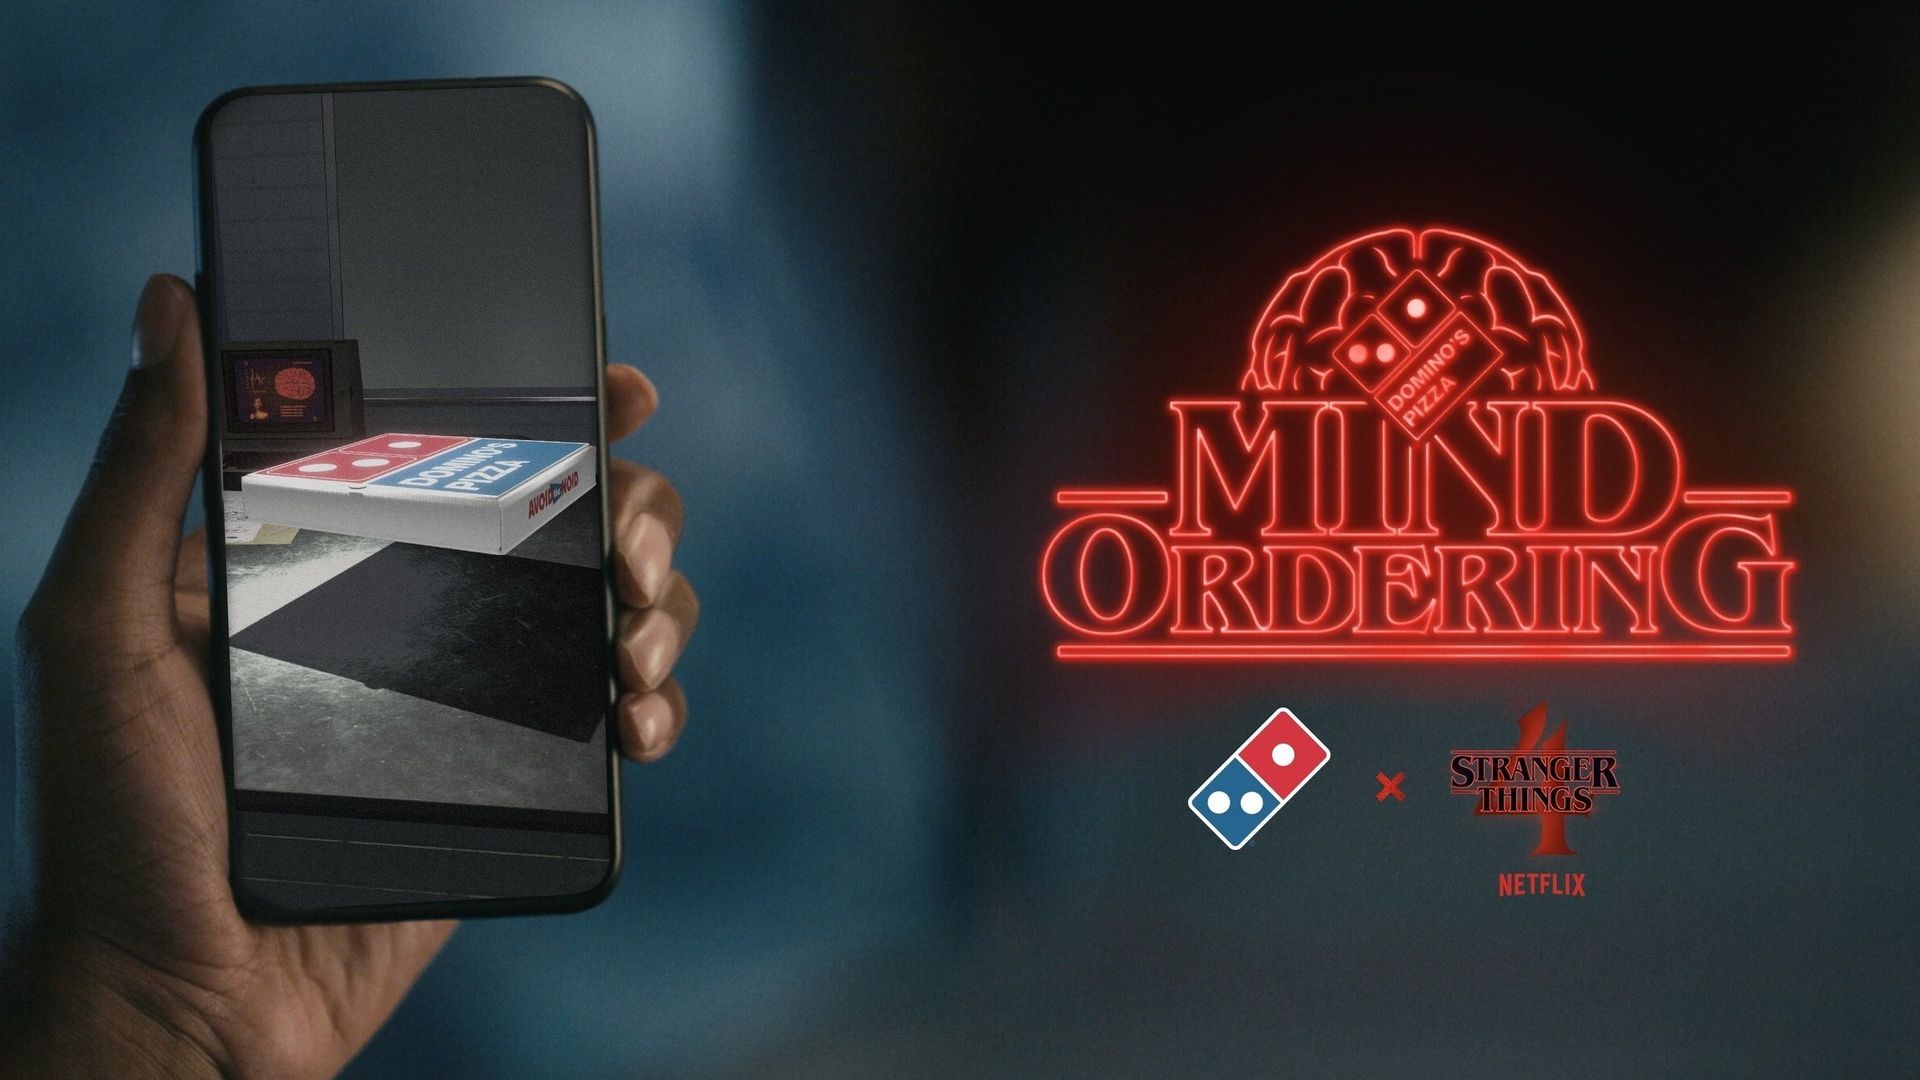 A dominos pizza in a smart phone screen.